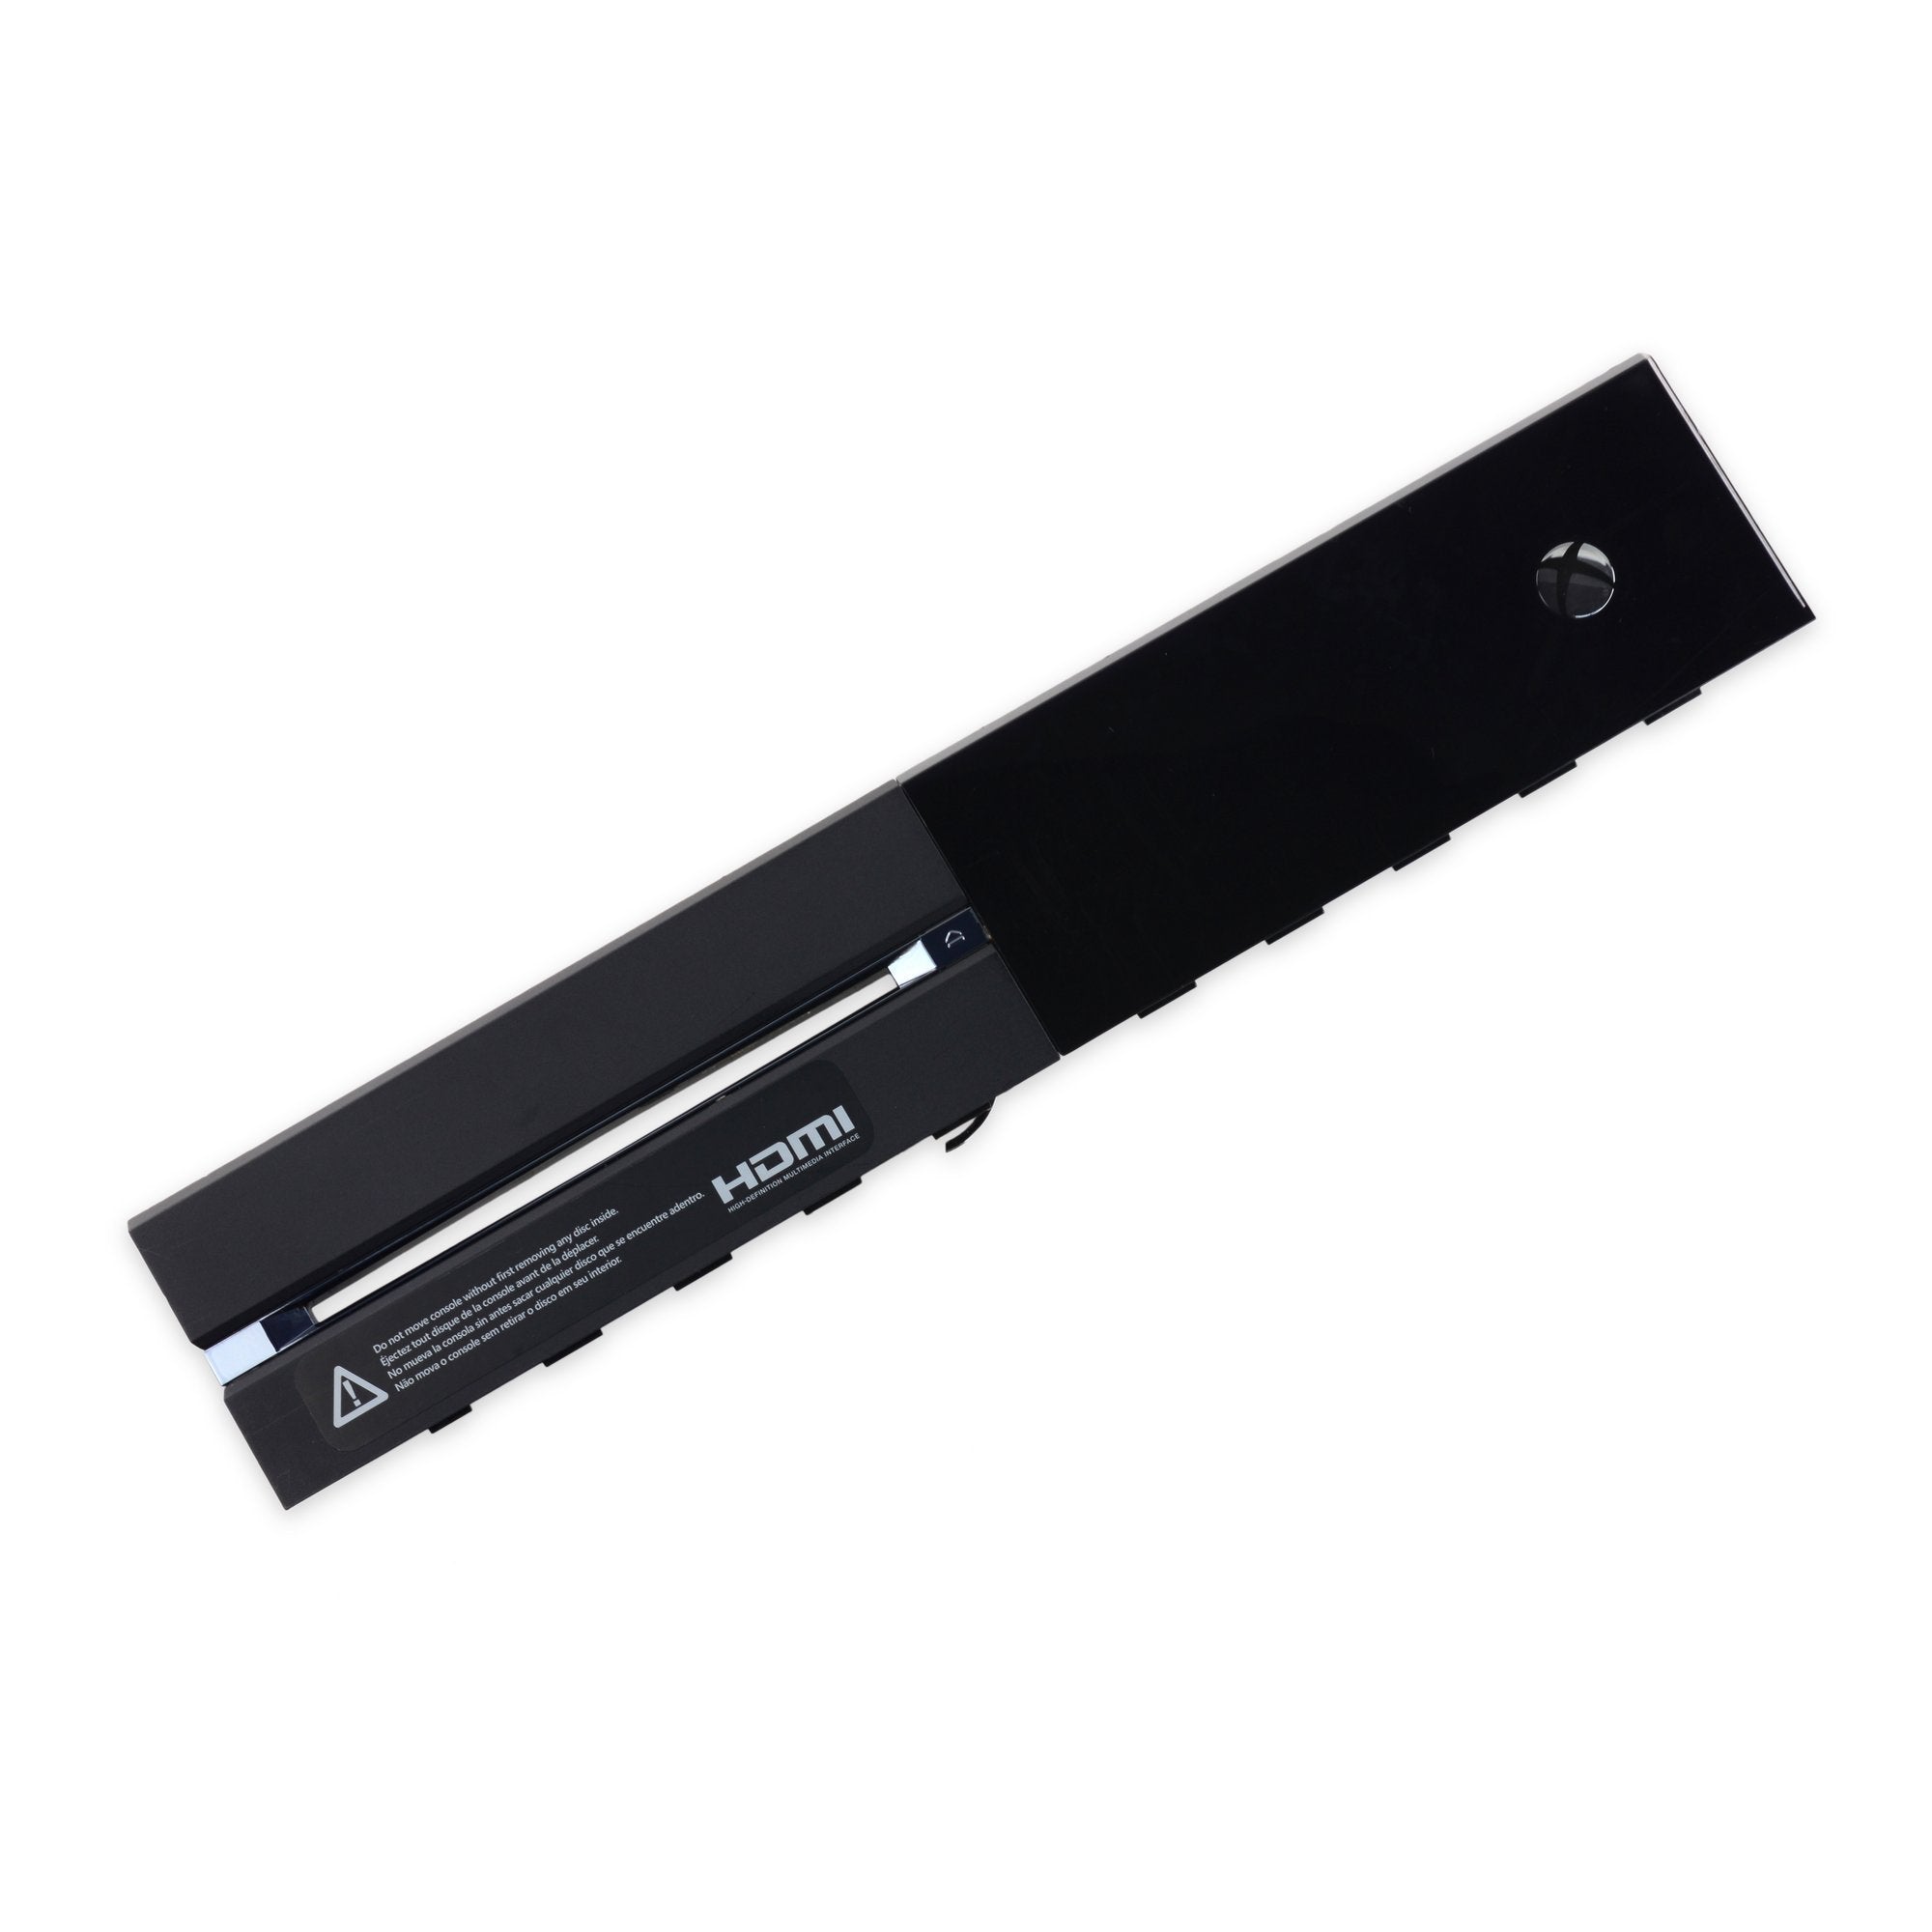 Xbox One Front Panel Black Used, A-Stock Standard Edition